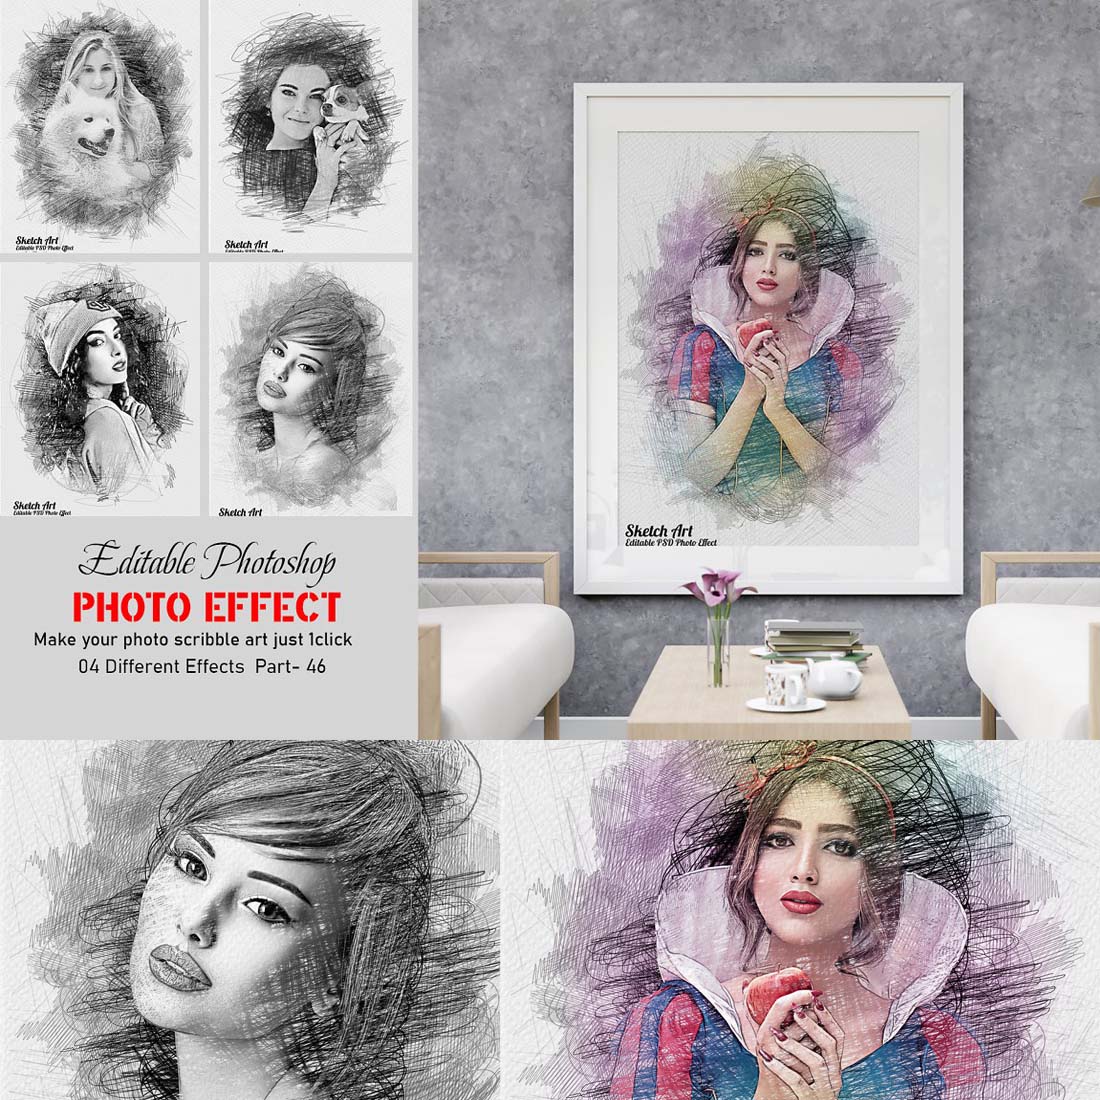 Photoshop Sketch Art Photo Effect cover image.